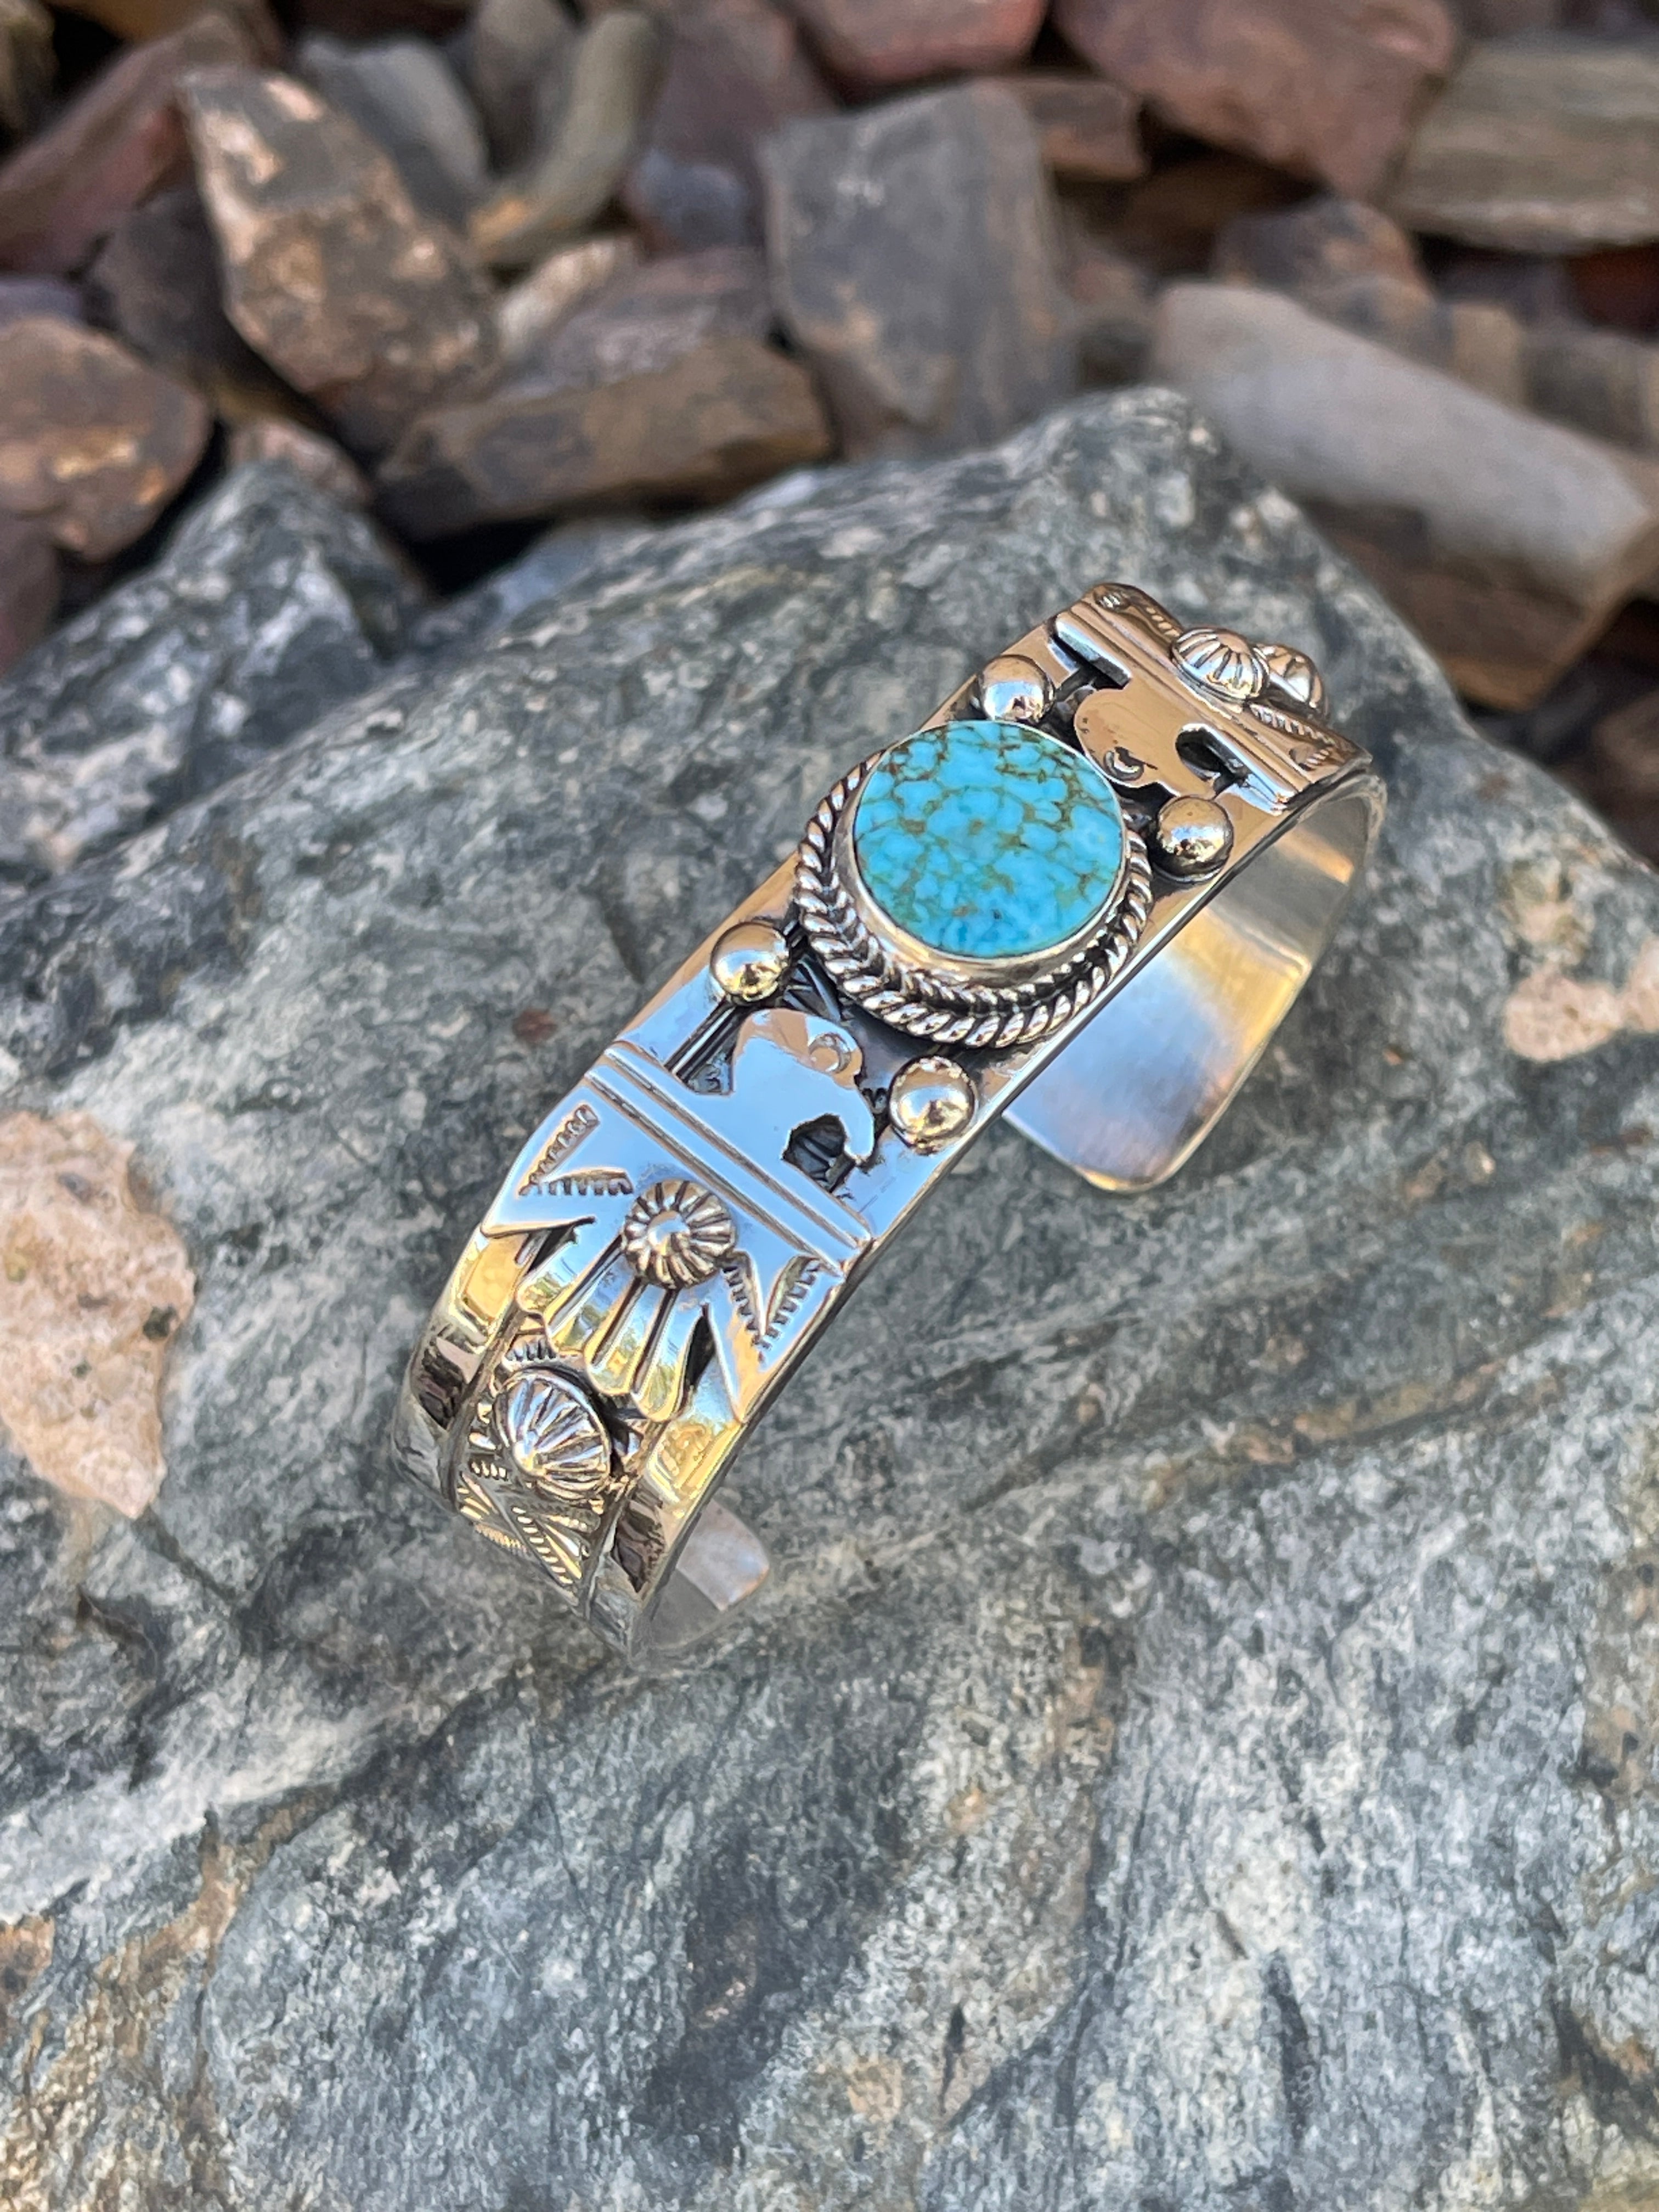 Handmade Solid Sterling Silver Turquoise Mountain Bracelet with Thunderbird Detail